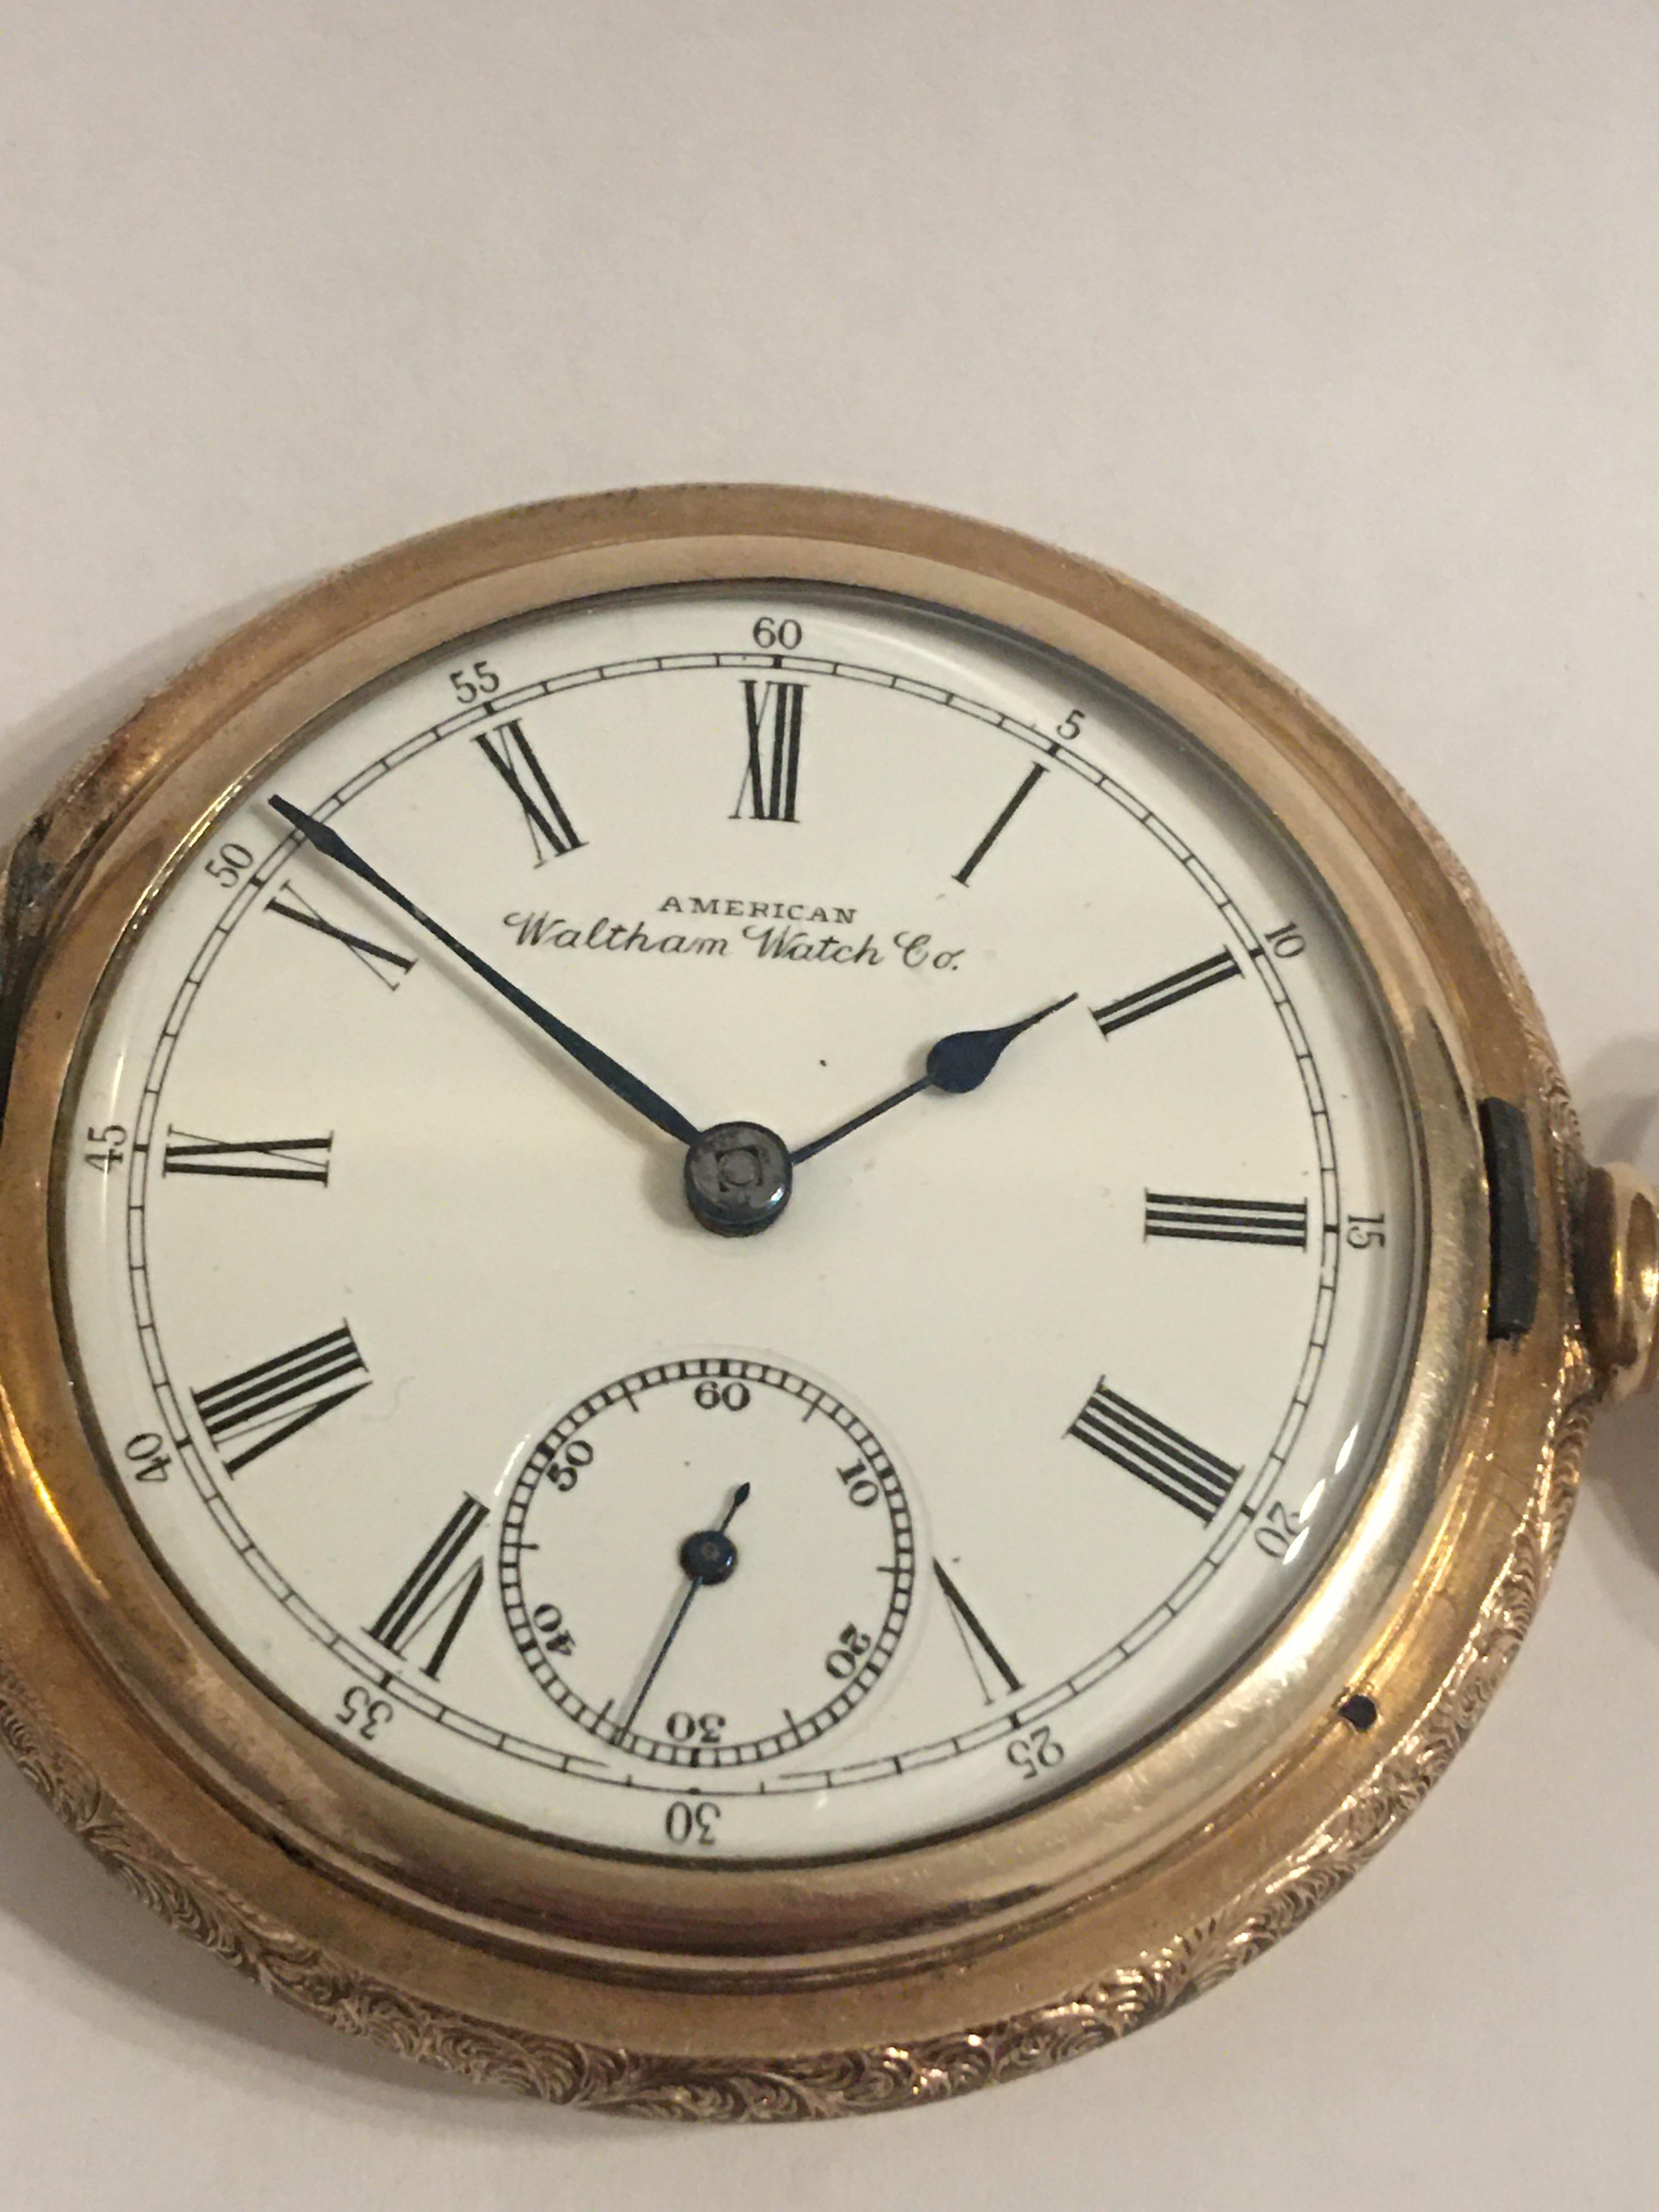 14K Gold-Filled Full Hunter American Waltham Watch Co.Antique Gents Pocket Watch 2